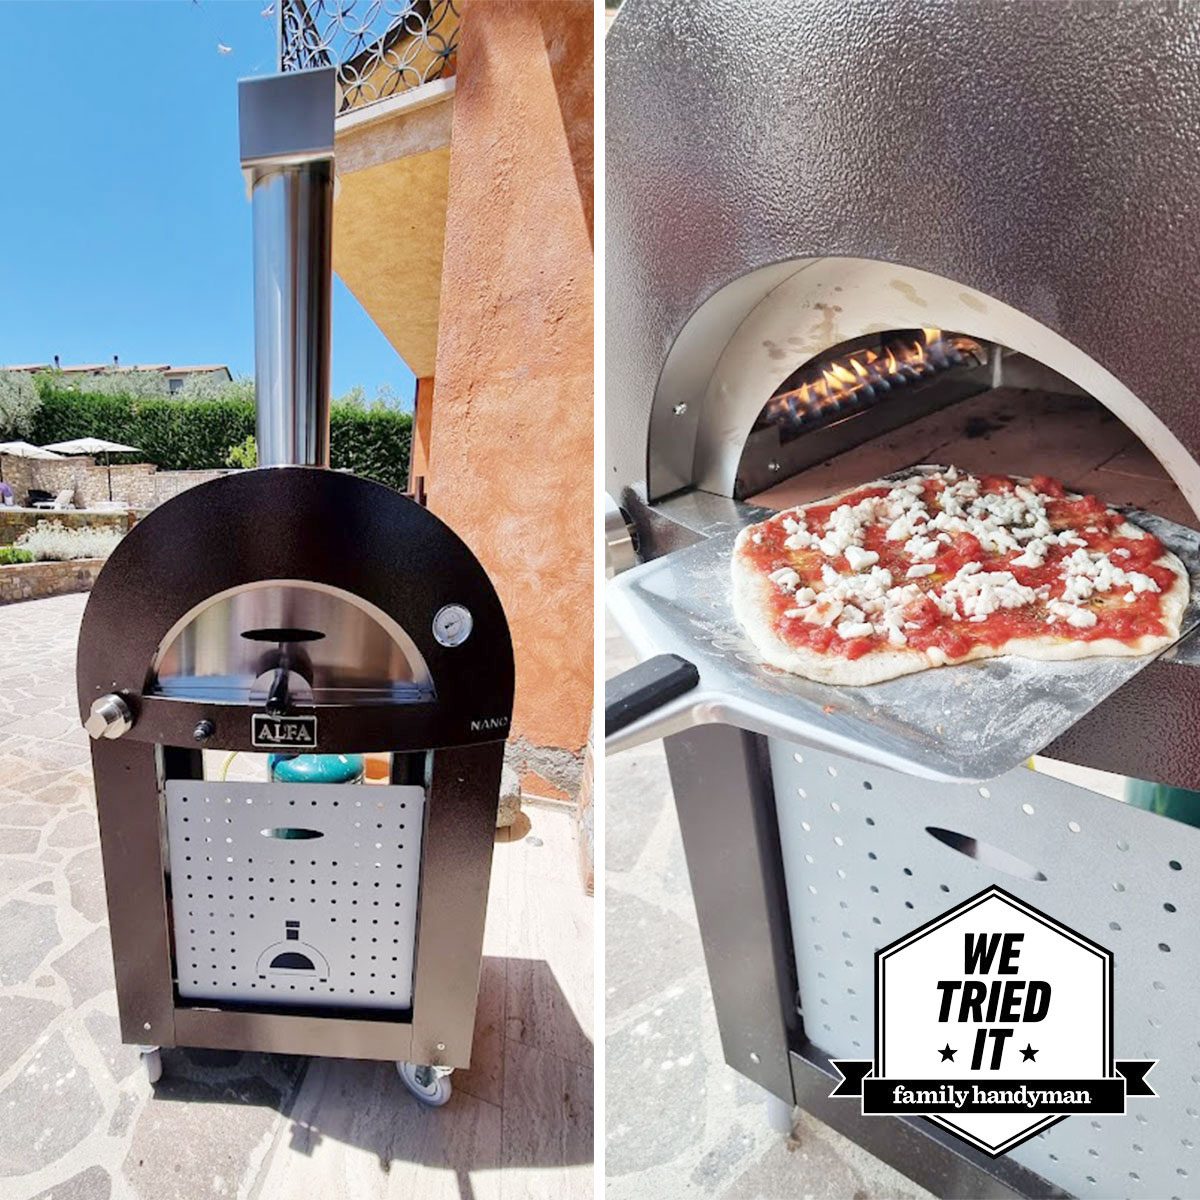 I Have an Italian Family, and the Alfa Nano Pizza Oven Is an Outdoor Kitchen Must-Have